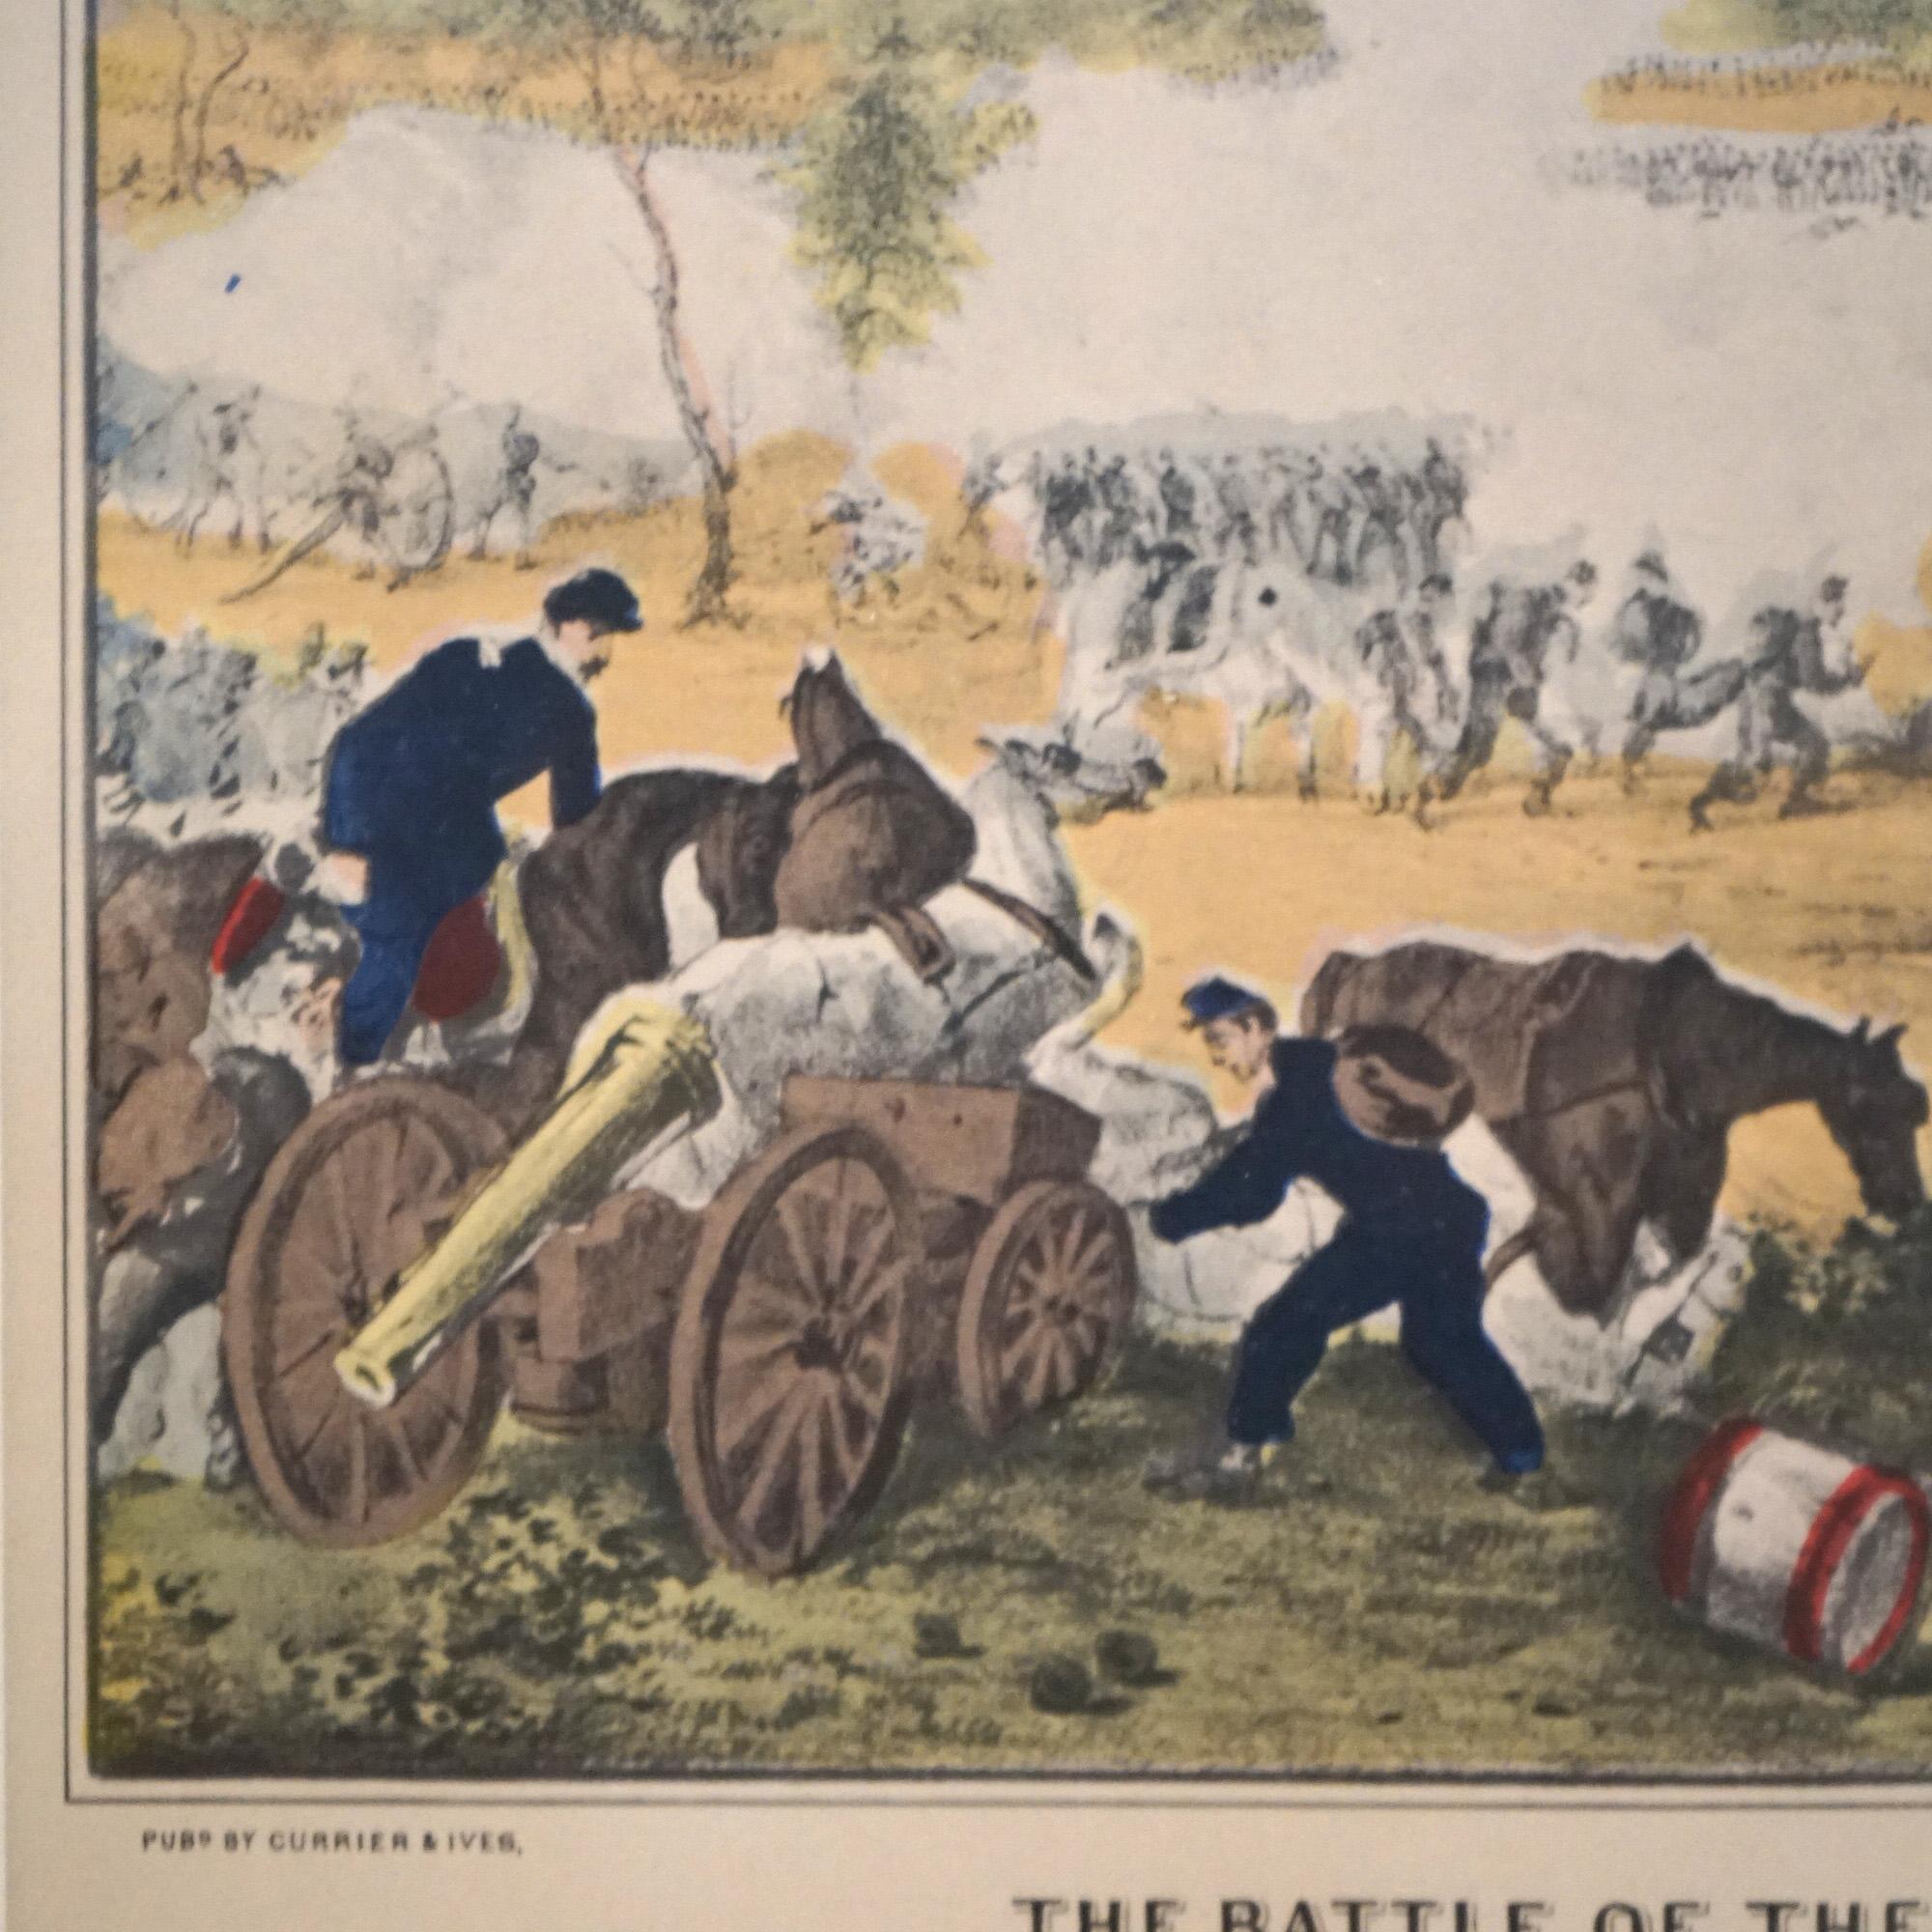 Antique Currier & Ives Lithograph “The Battle Of The Wilderness” Dated 1864 3